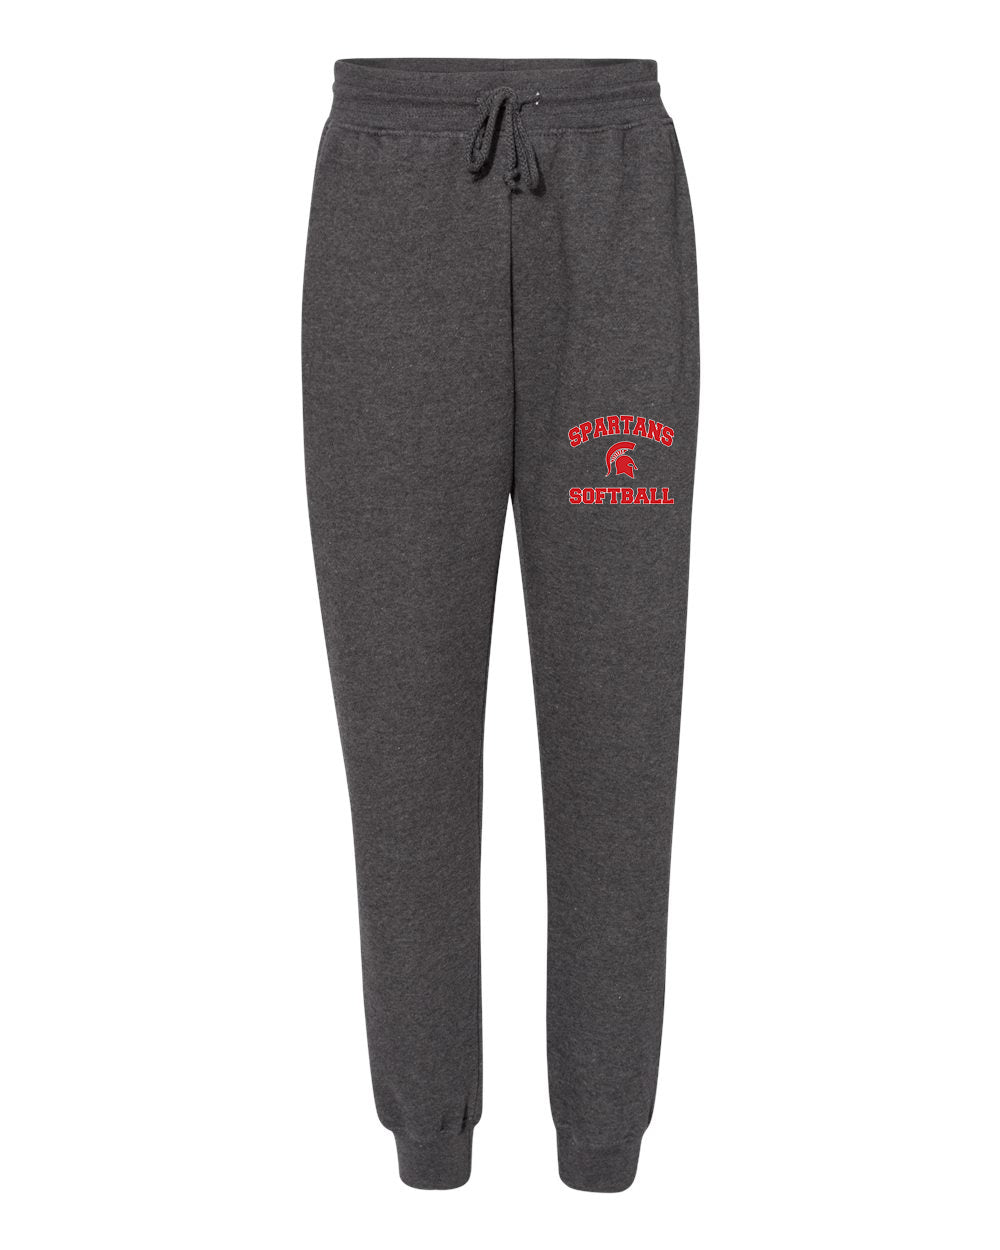 ELGS Ladies Badger Fleece Joggers - 1216 (color options available)